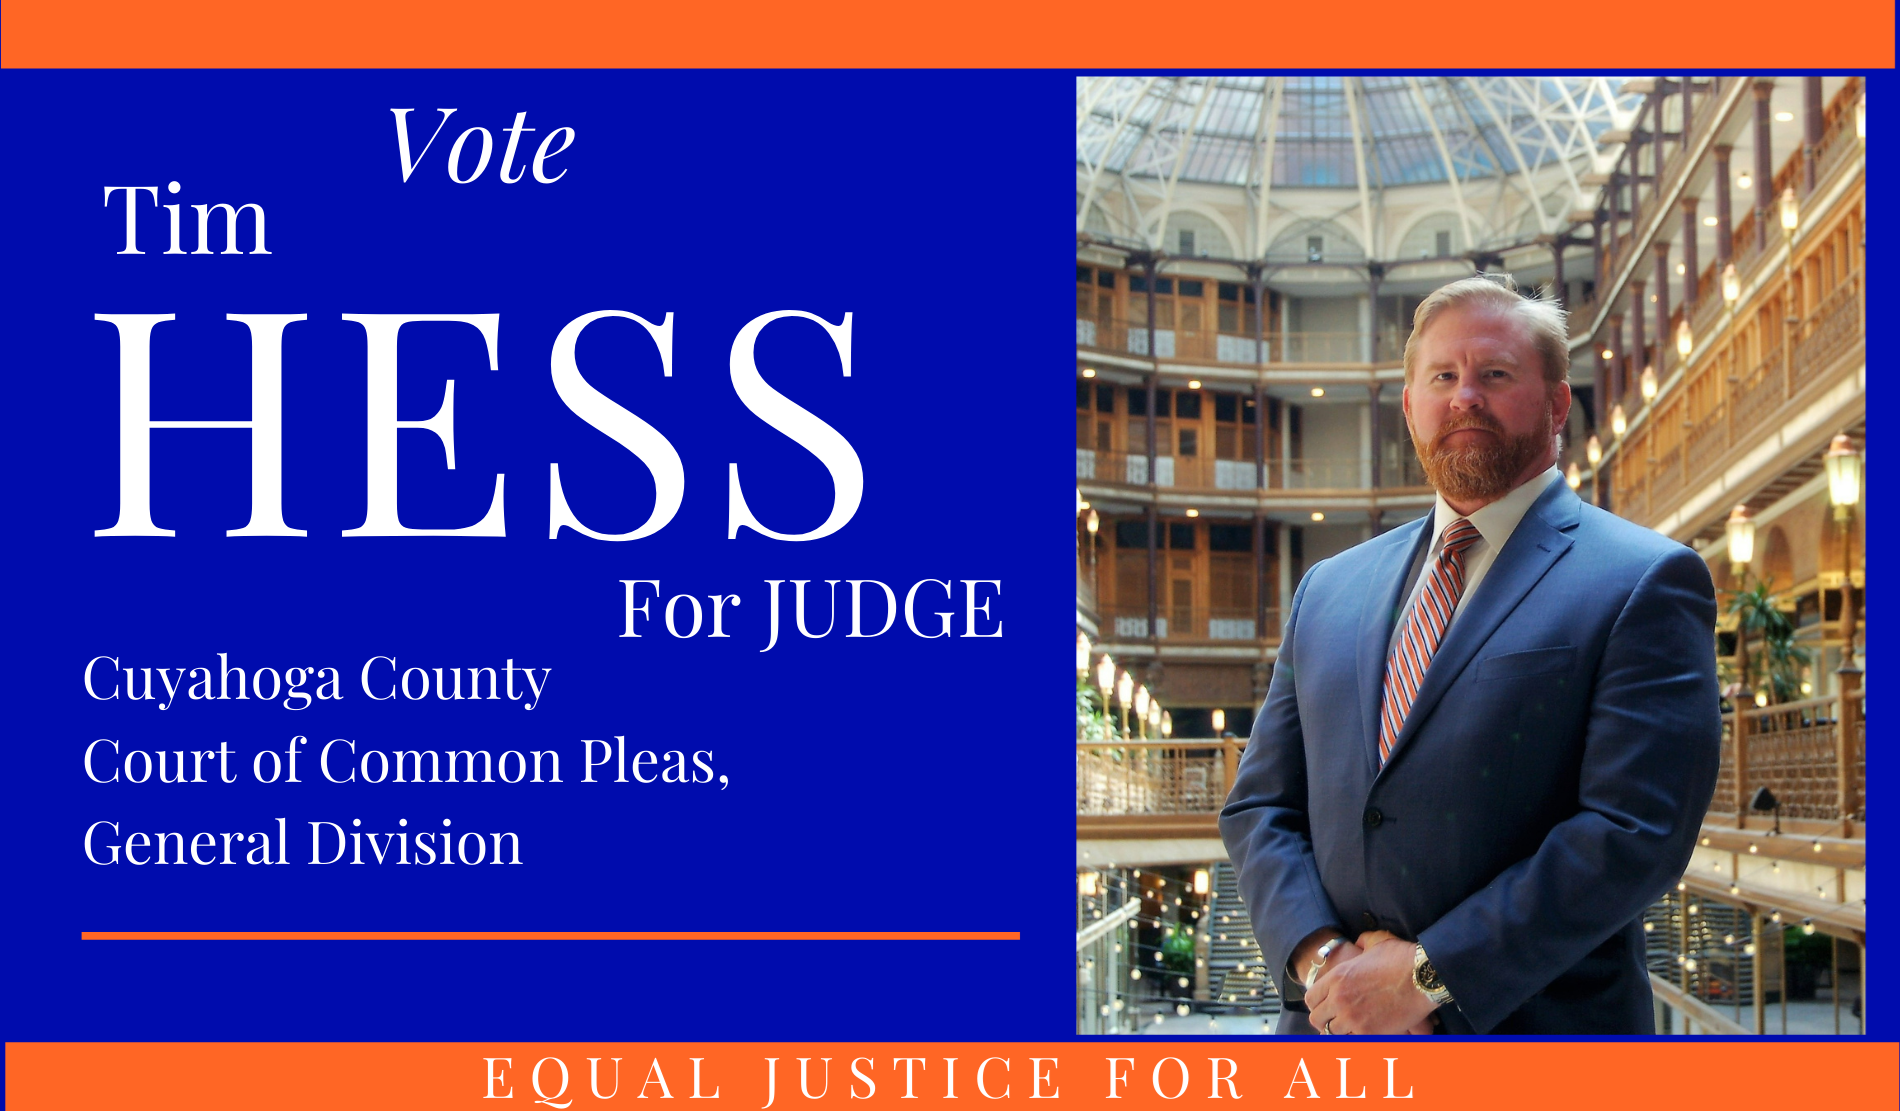 Vote Tim Hess for Judge  Cuyahoga County Court of Common Please General Division